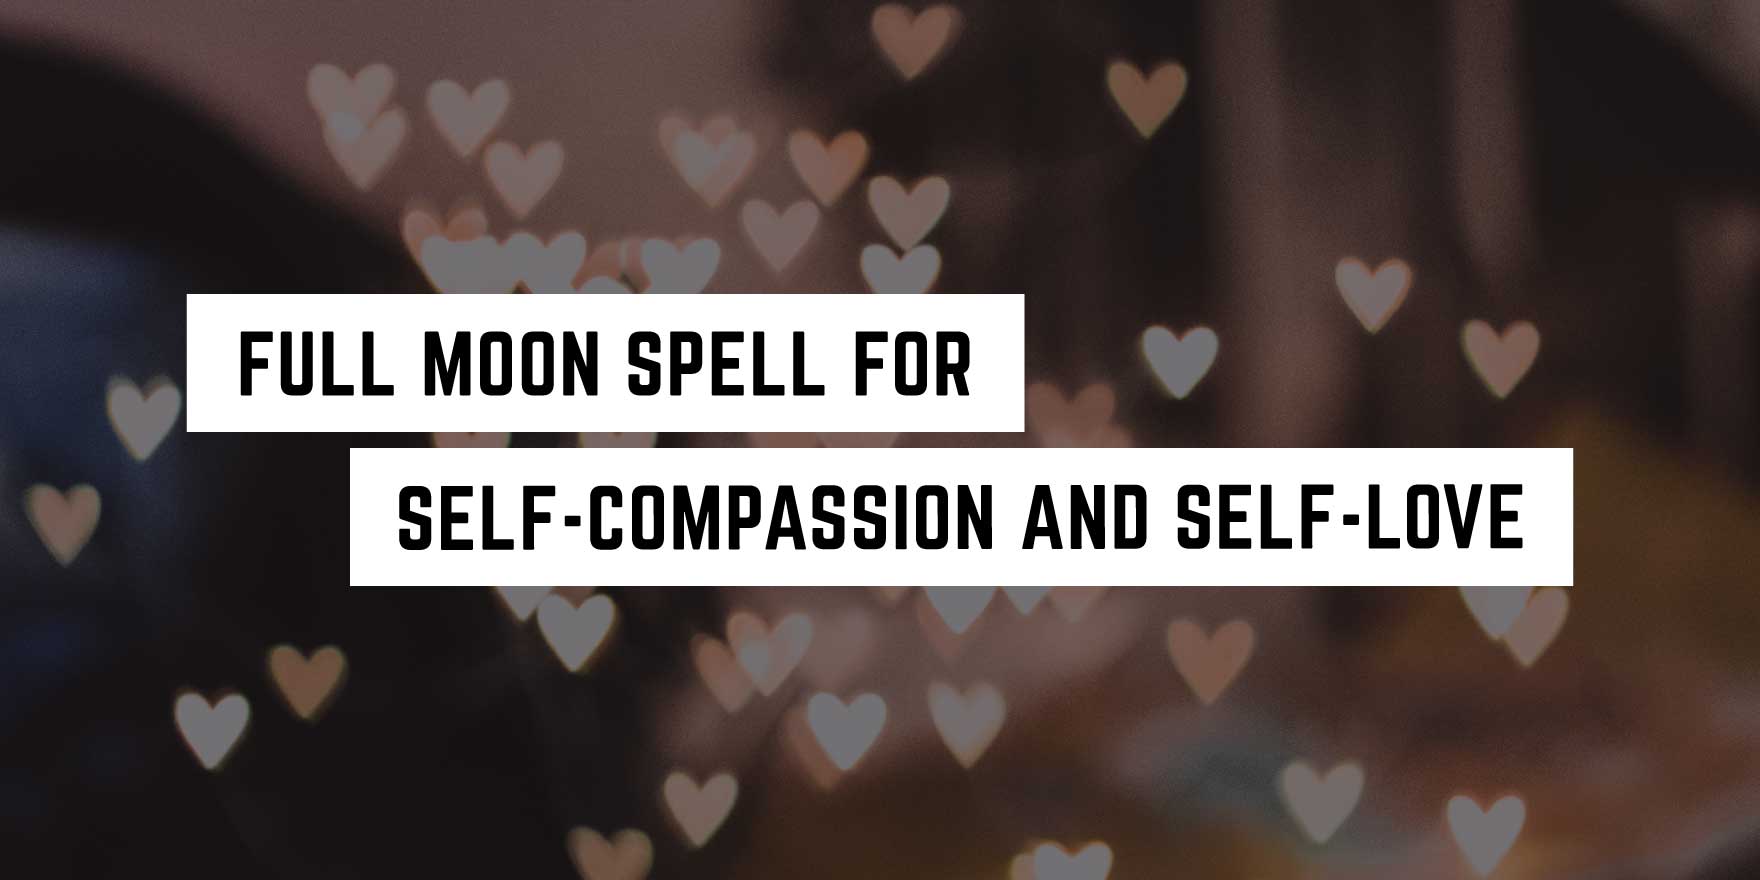 Full Moon Spell for Self-Compassion and Self-Love